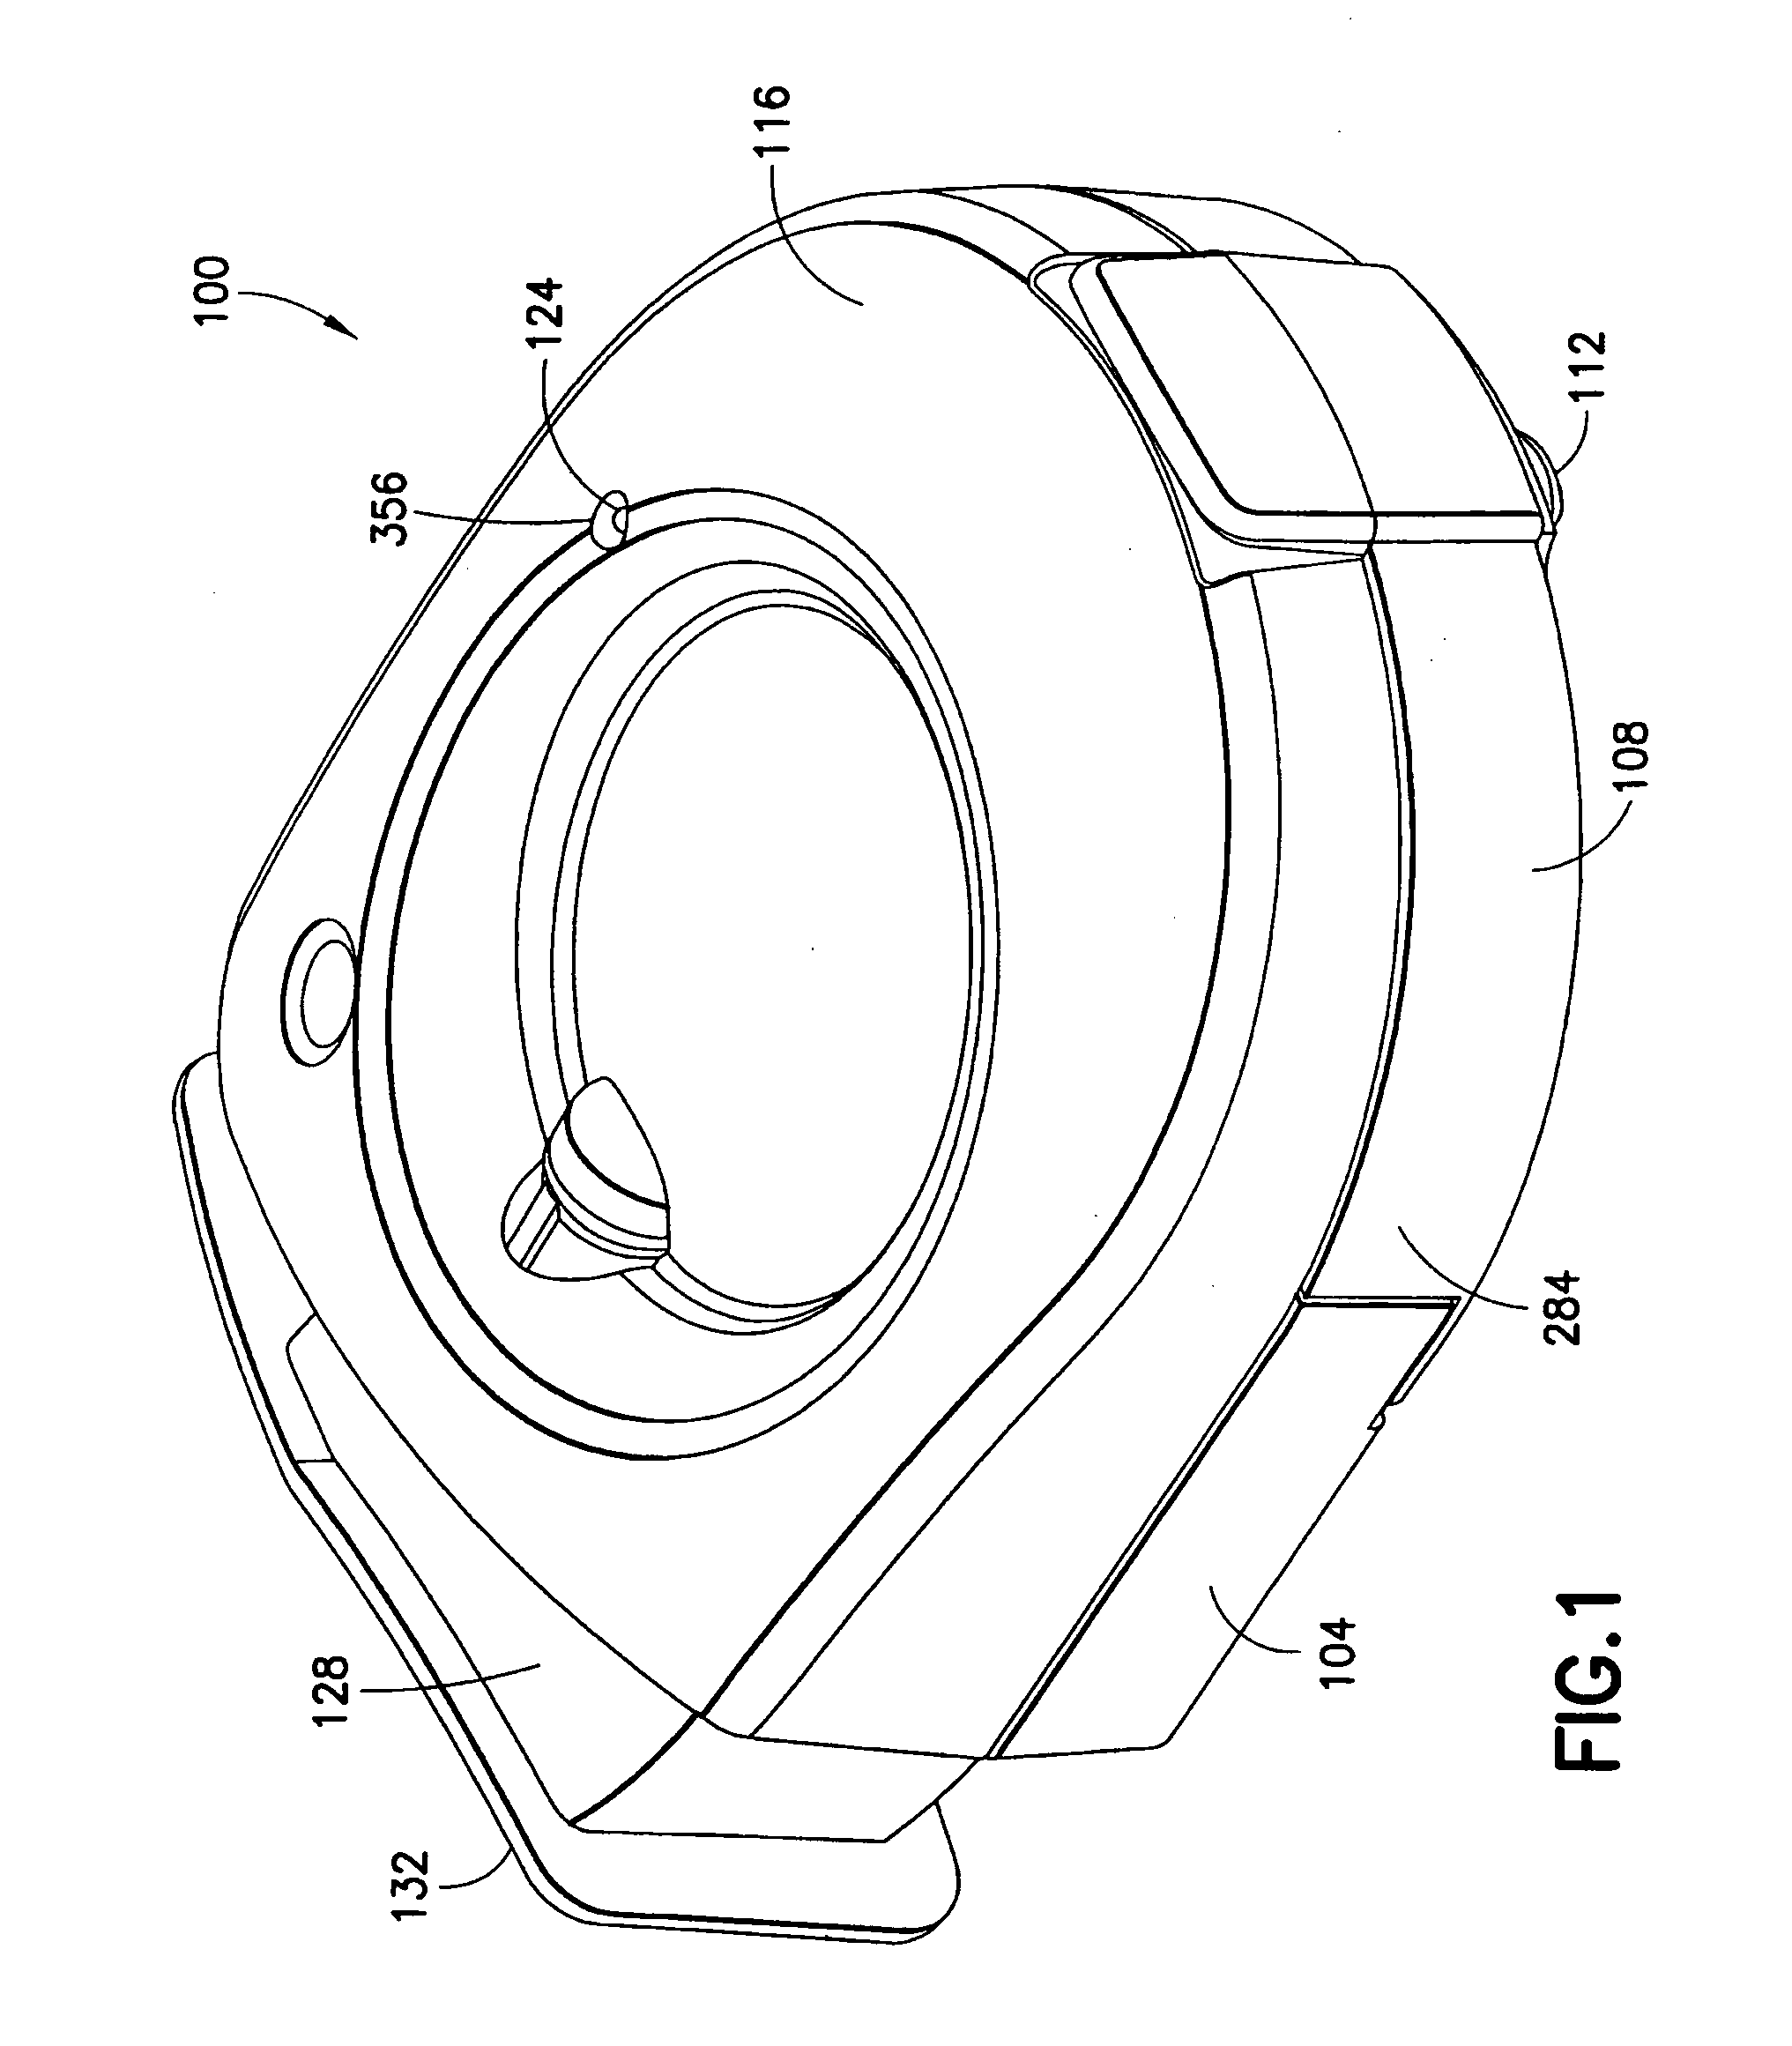 Self-injection device